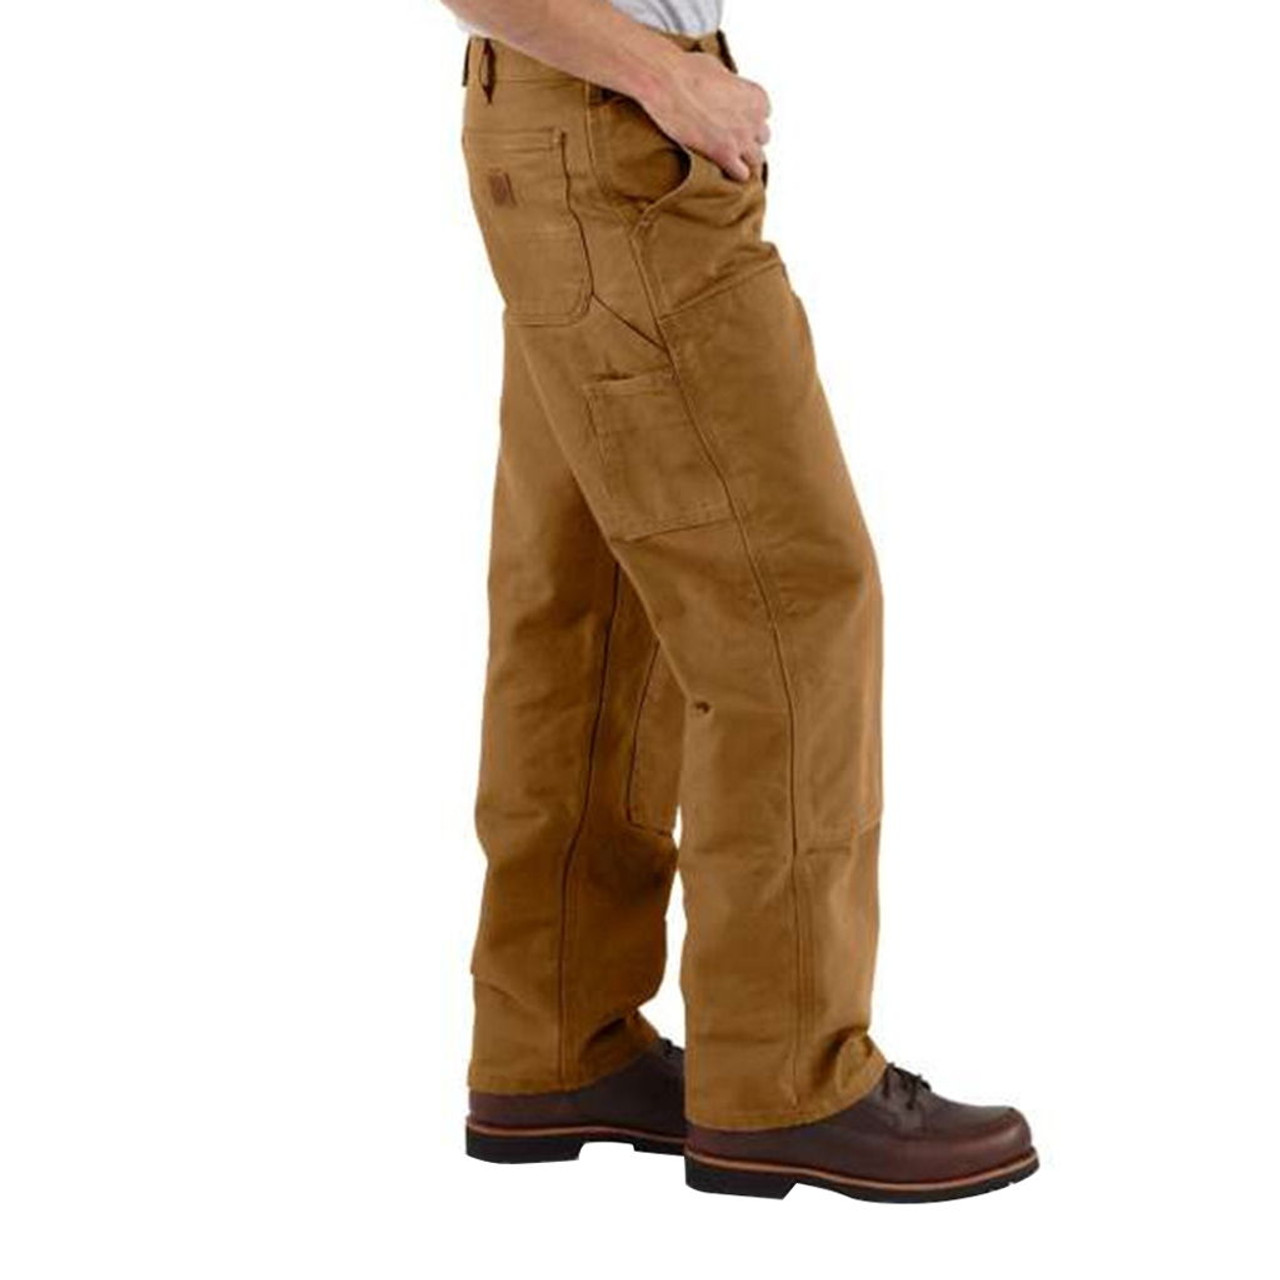 Carhartt Men's Washed Duck Double Front Work Dungaree Pant - 31x34